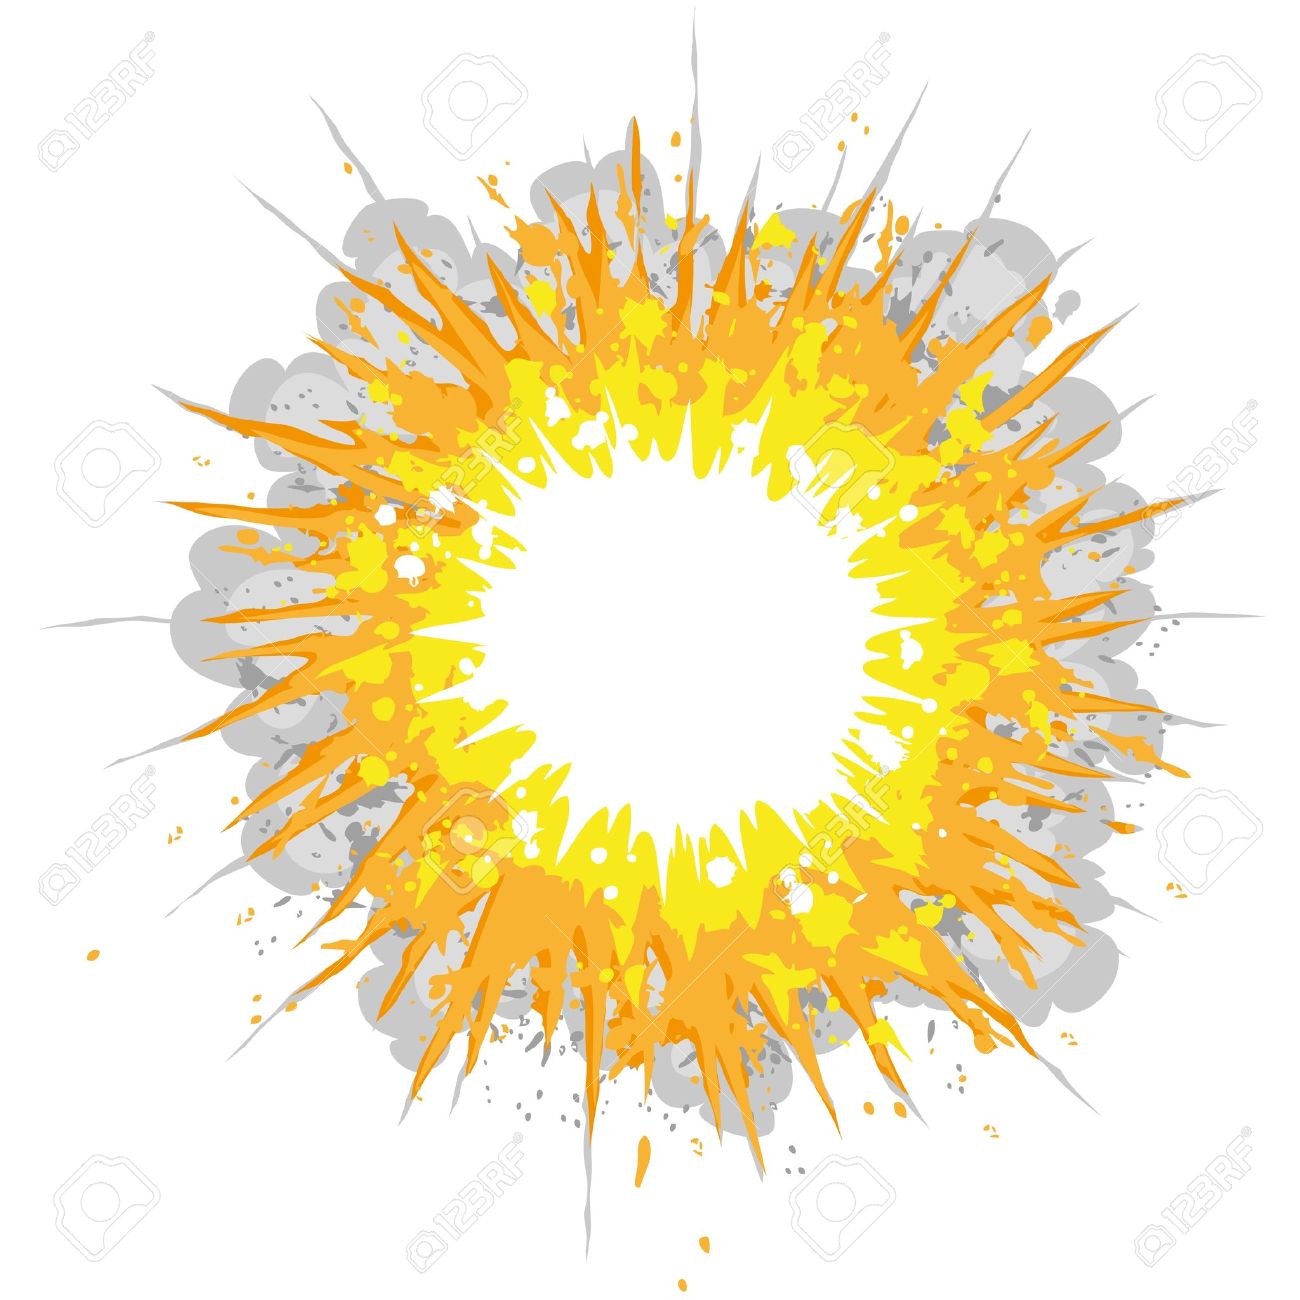 Explosion clip art free free  - Explosion Clipart